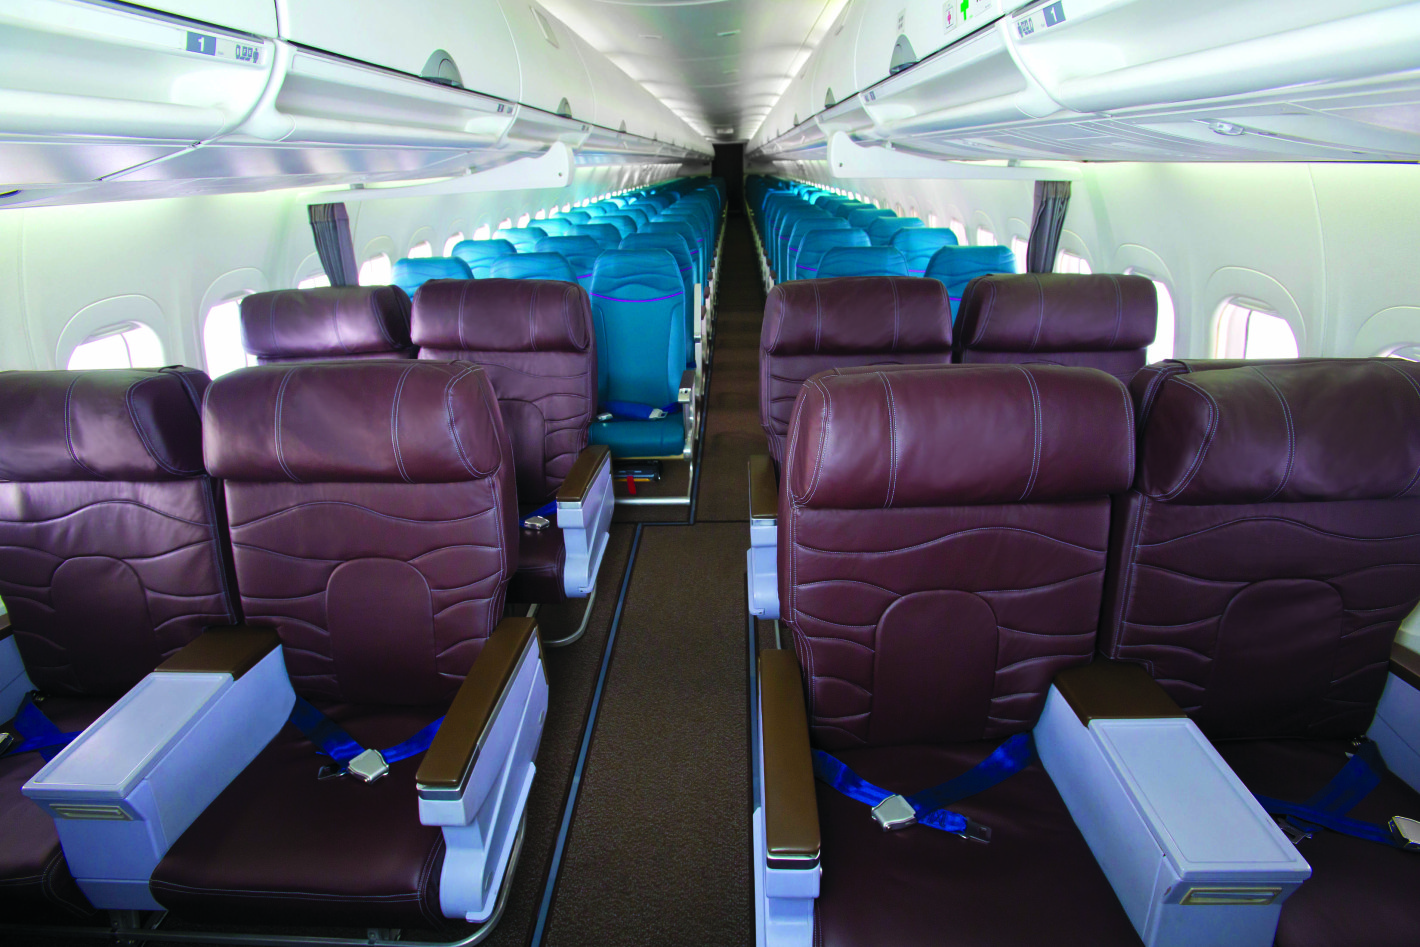 the inside of an airplane with seats